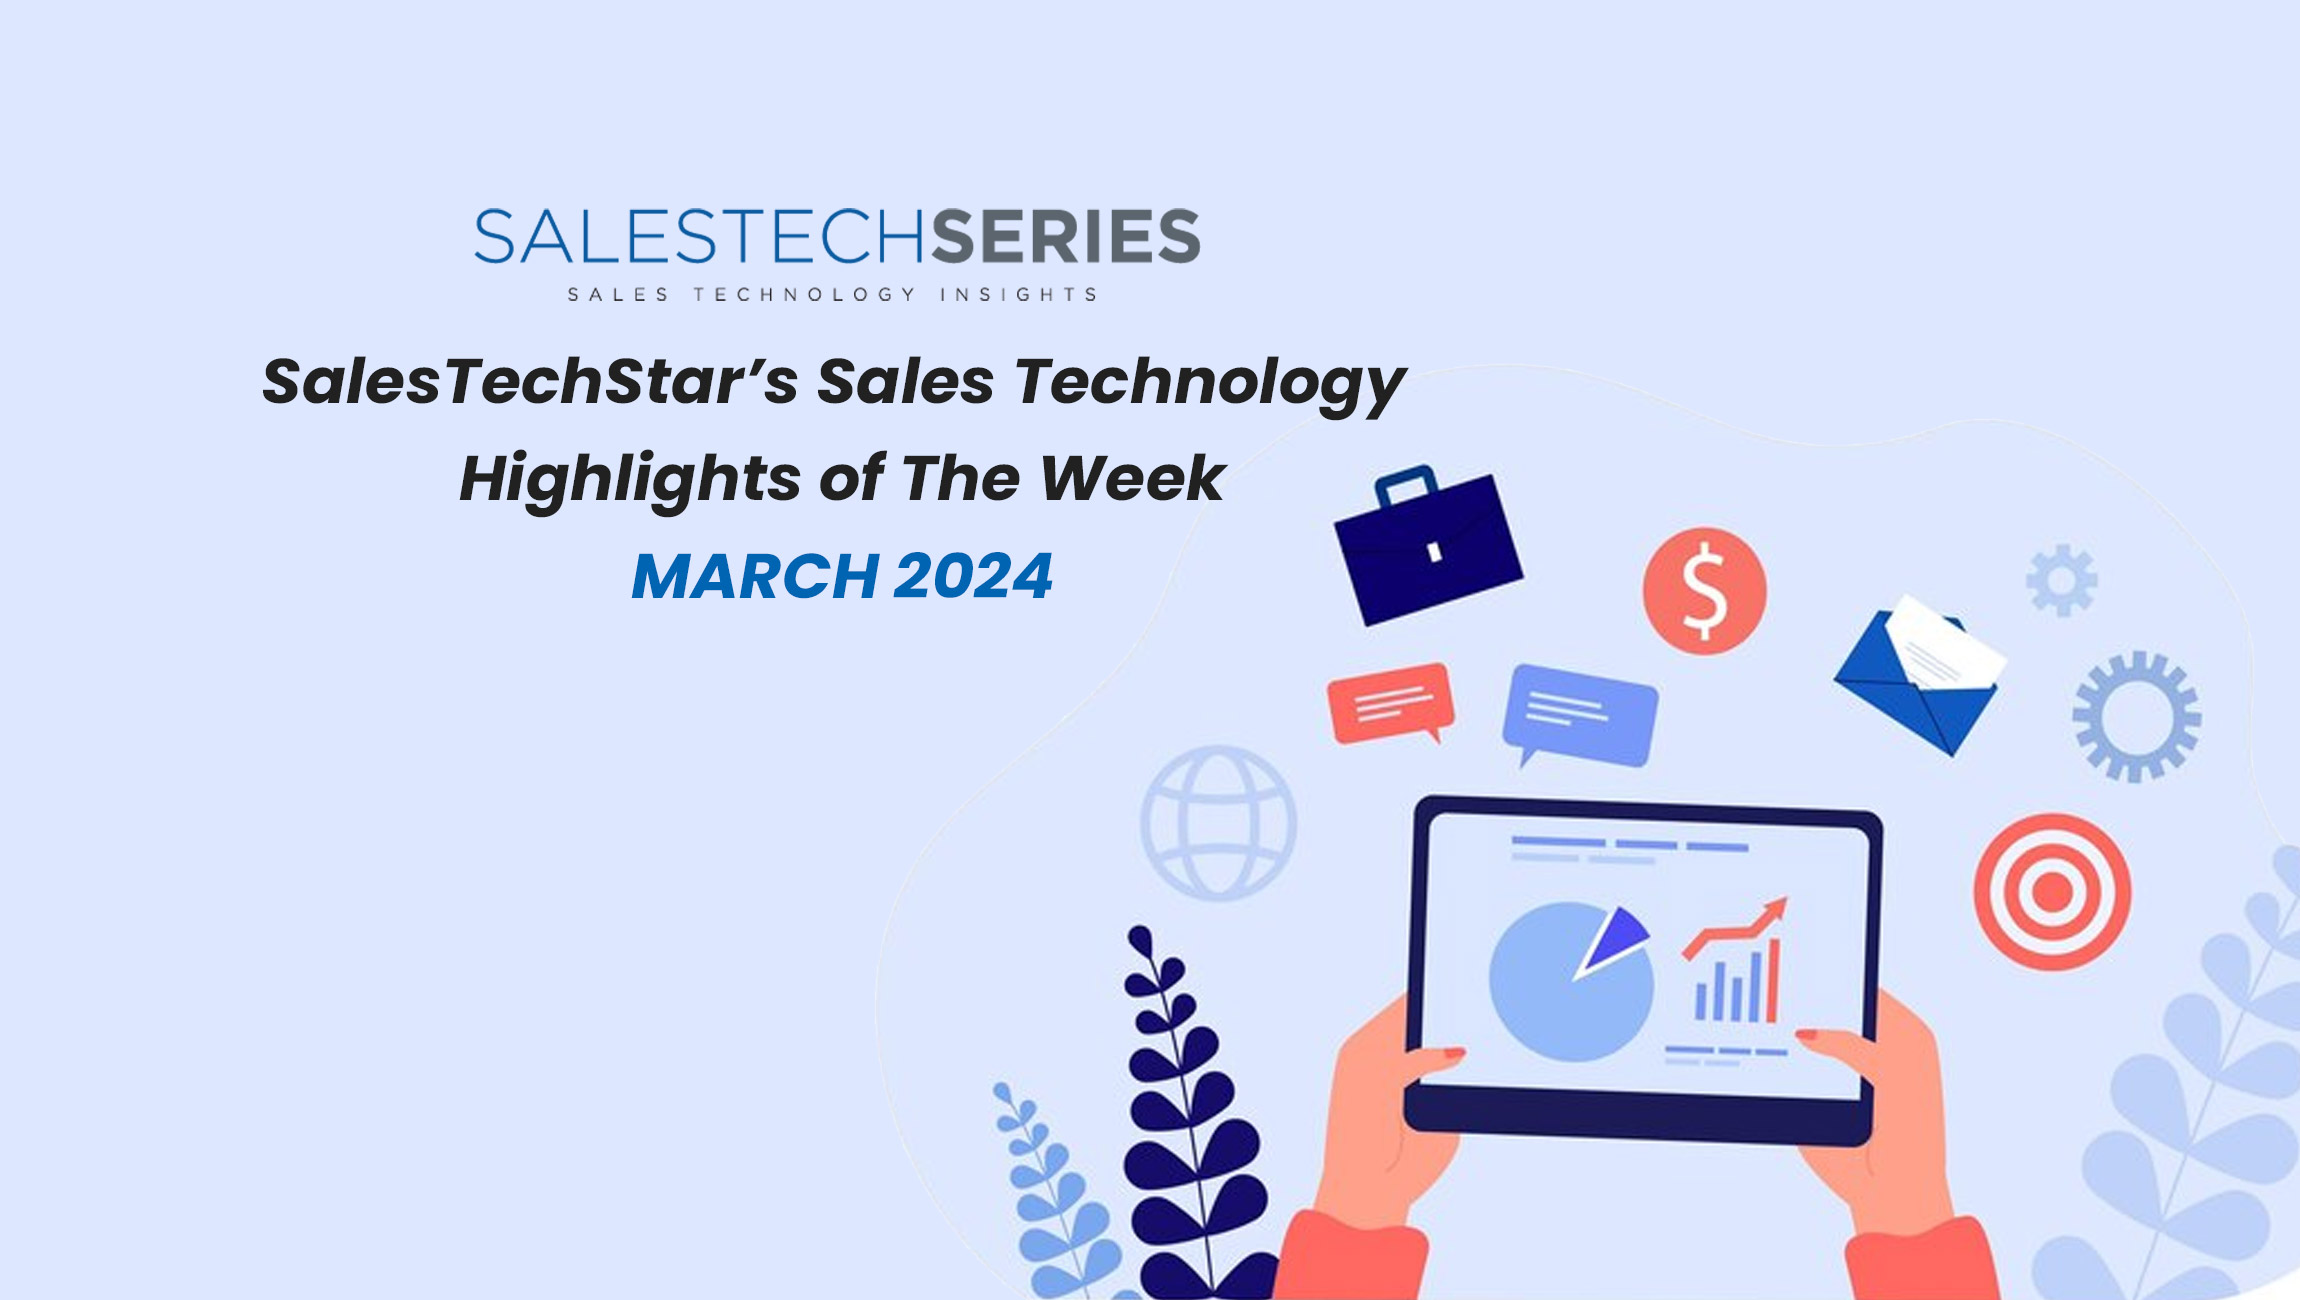 SalesTechStar’s Sales Technology Highlights of The Week: Featuring Clari, Deepgram, Lily AI and more!